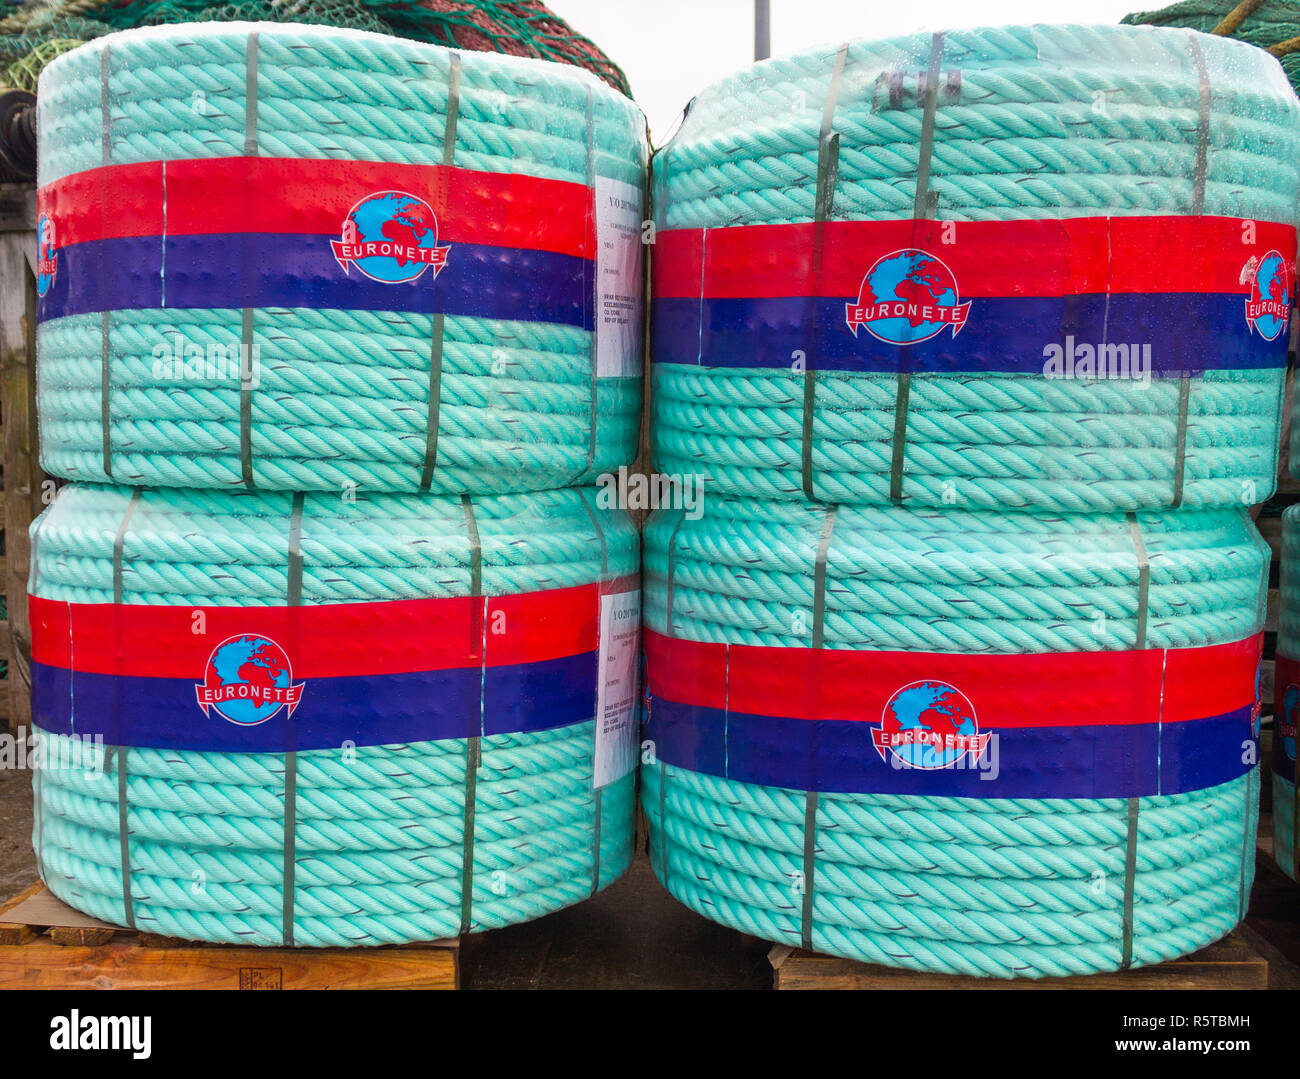 220 Metre Coils of nylon rope on pallets used for making trawl gear for trawlers. Stock Photo